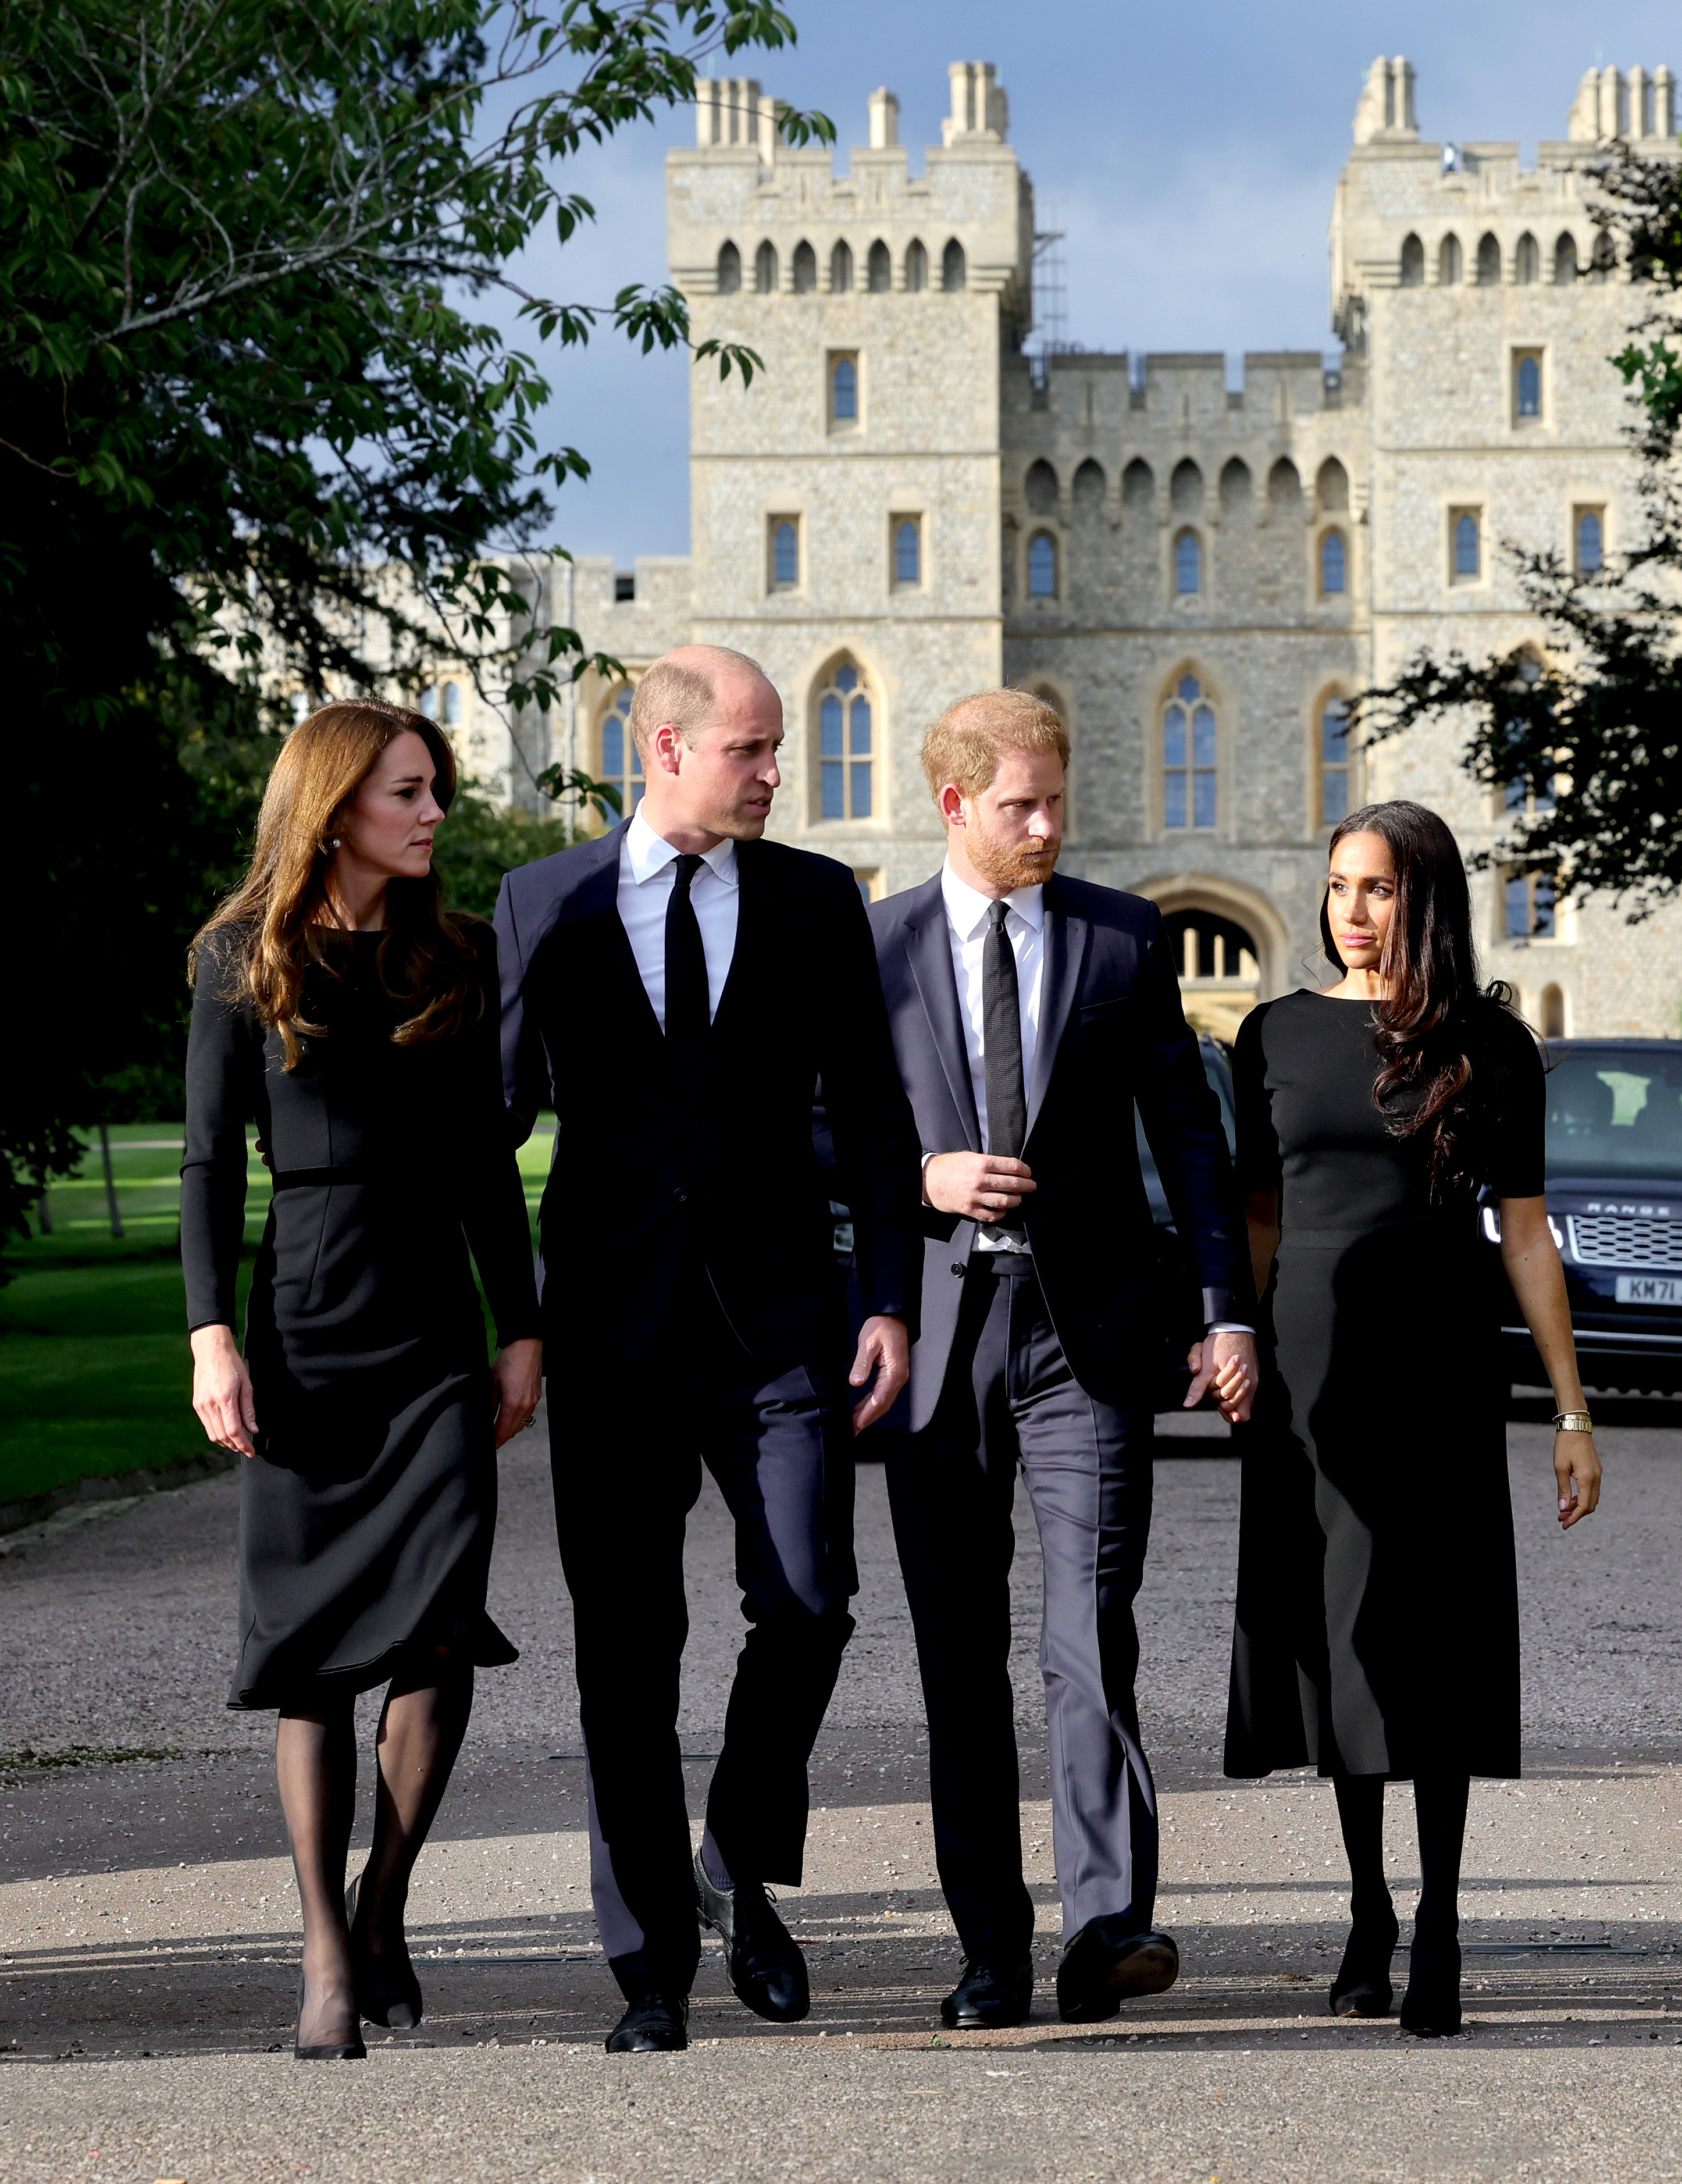 Kate Middleton, Prince William, Prince Harry and Meghan Markle on a walkabout in Windsor, England on September 10, 2022 | Source: Getty Images